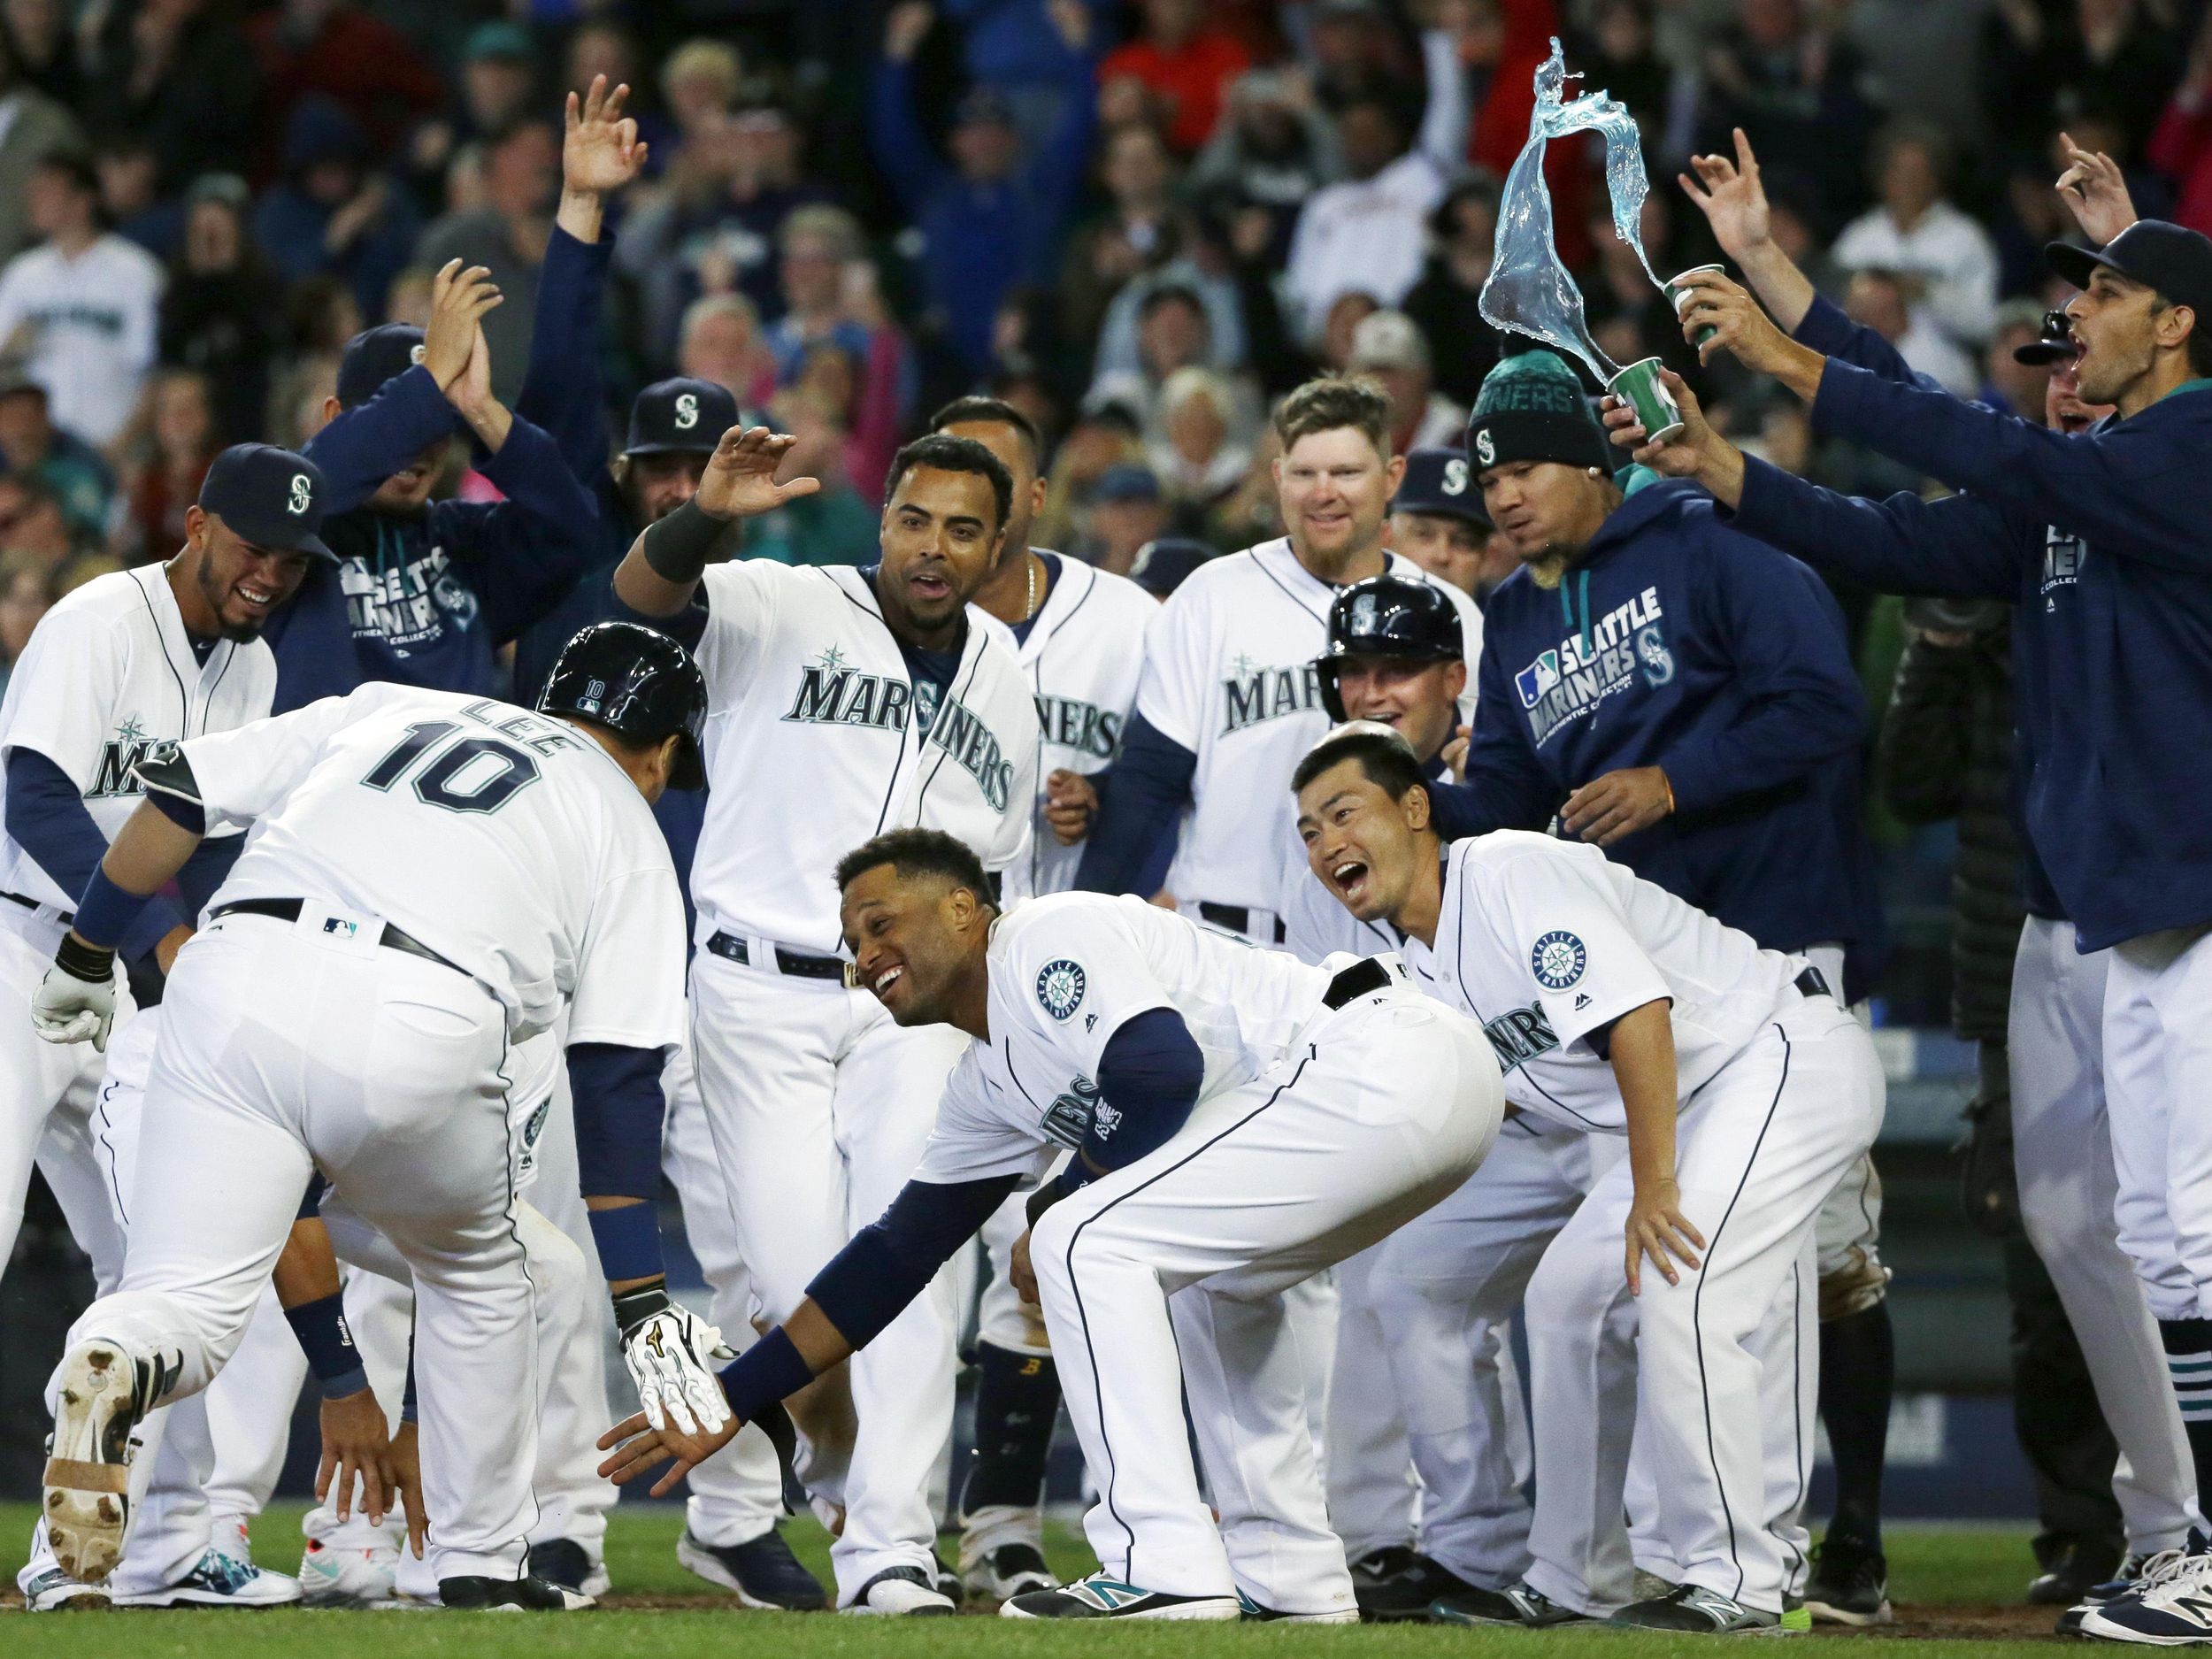 Dae-Ho Lee's pinch-hit homer in 10th lifts Mariners over Texas